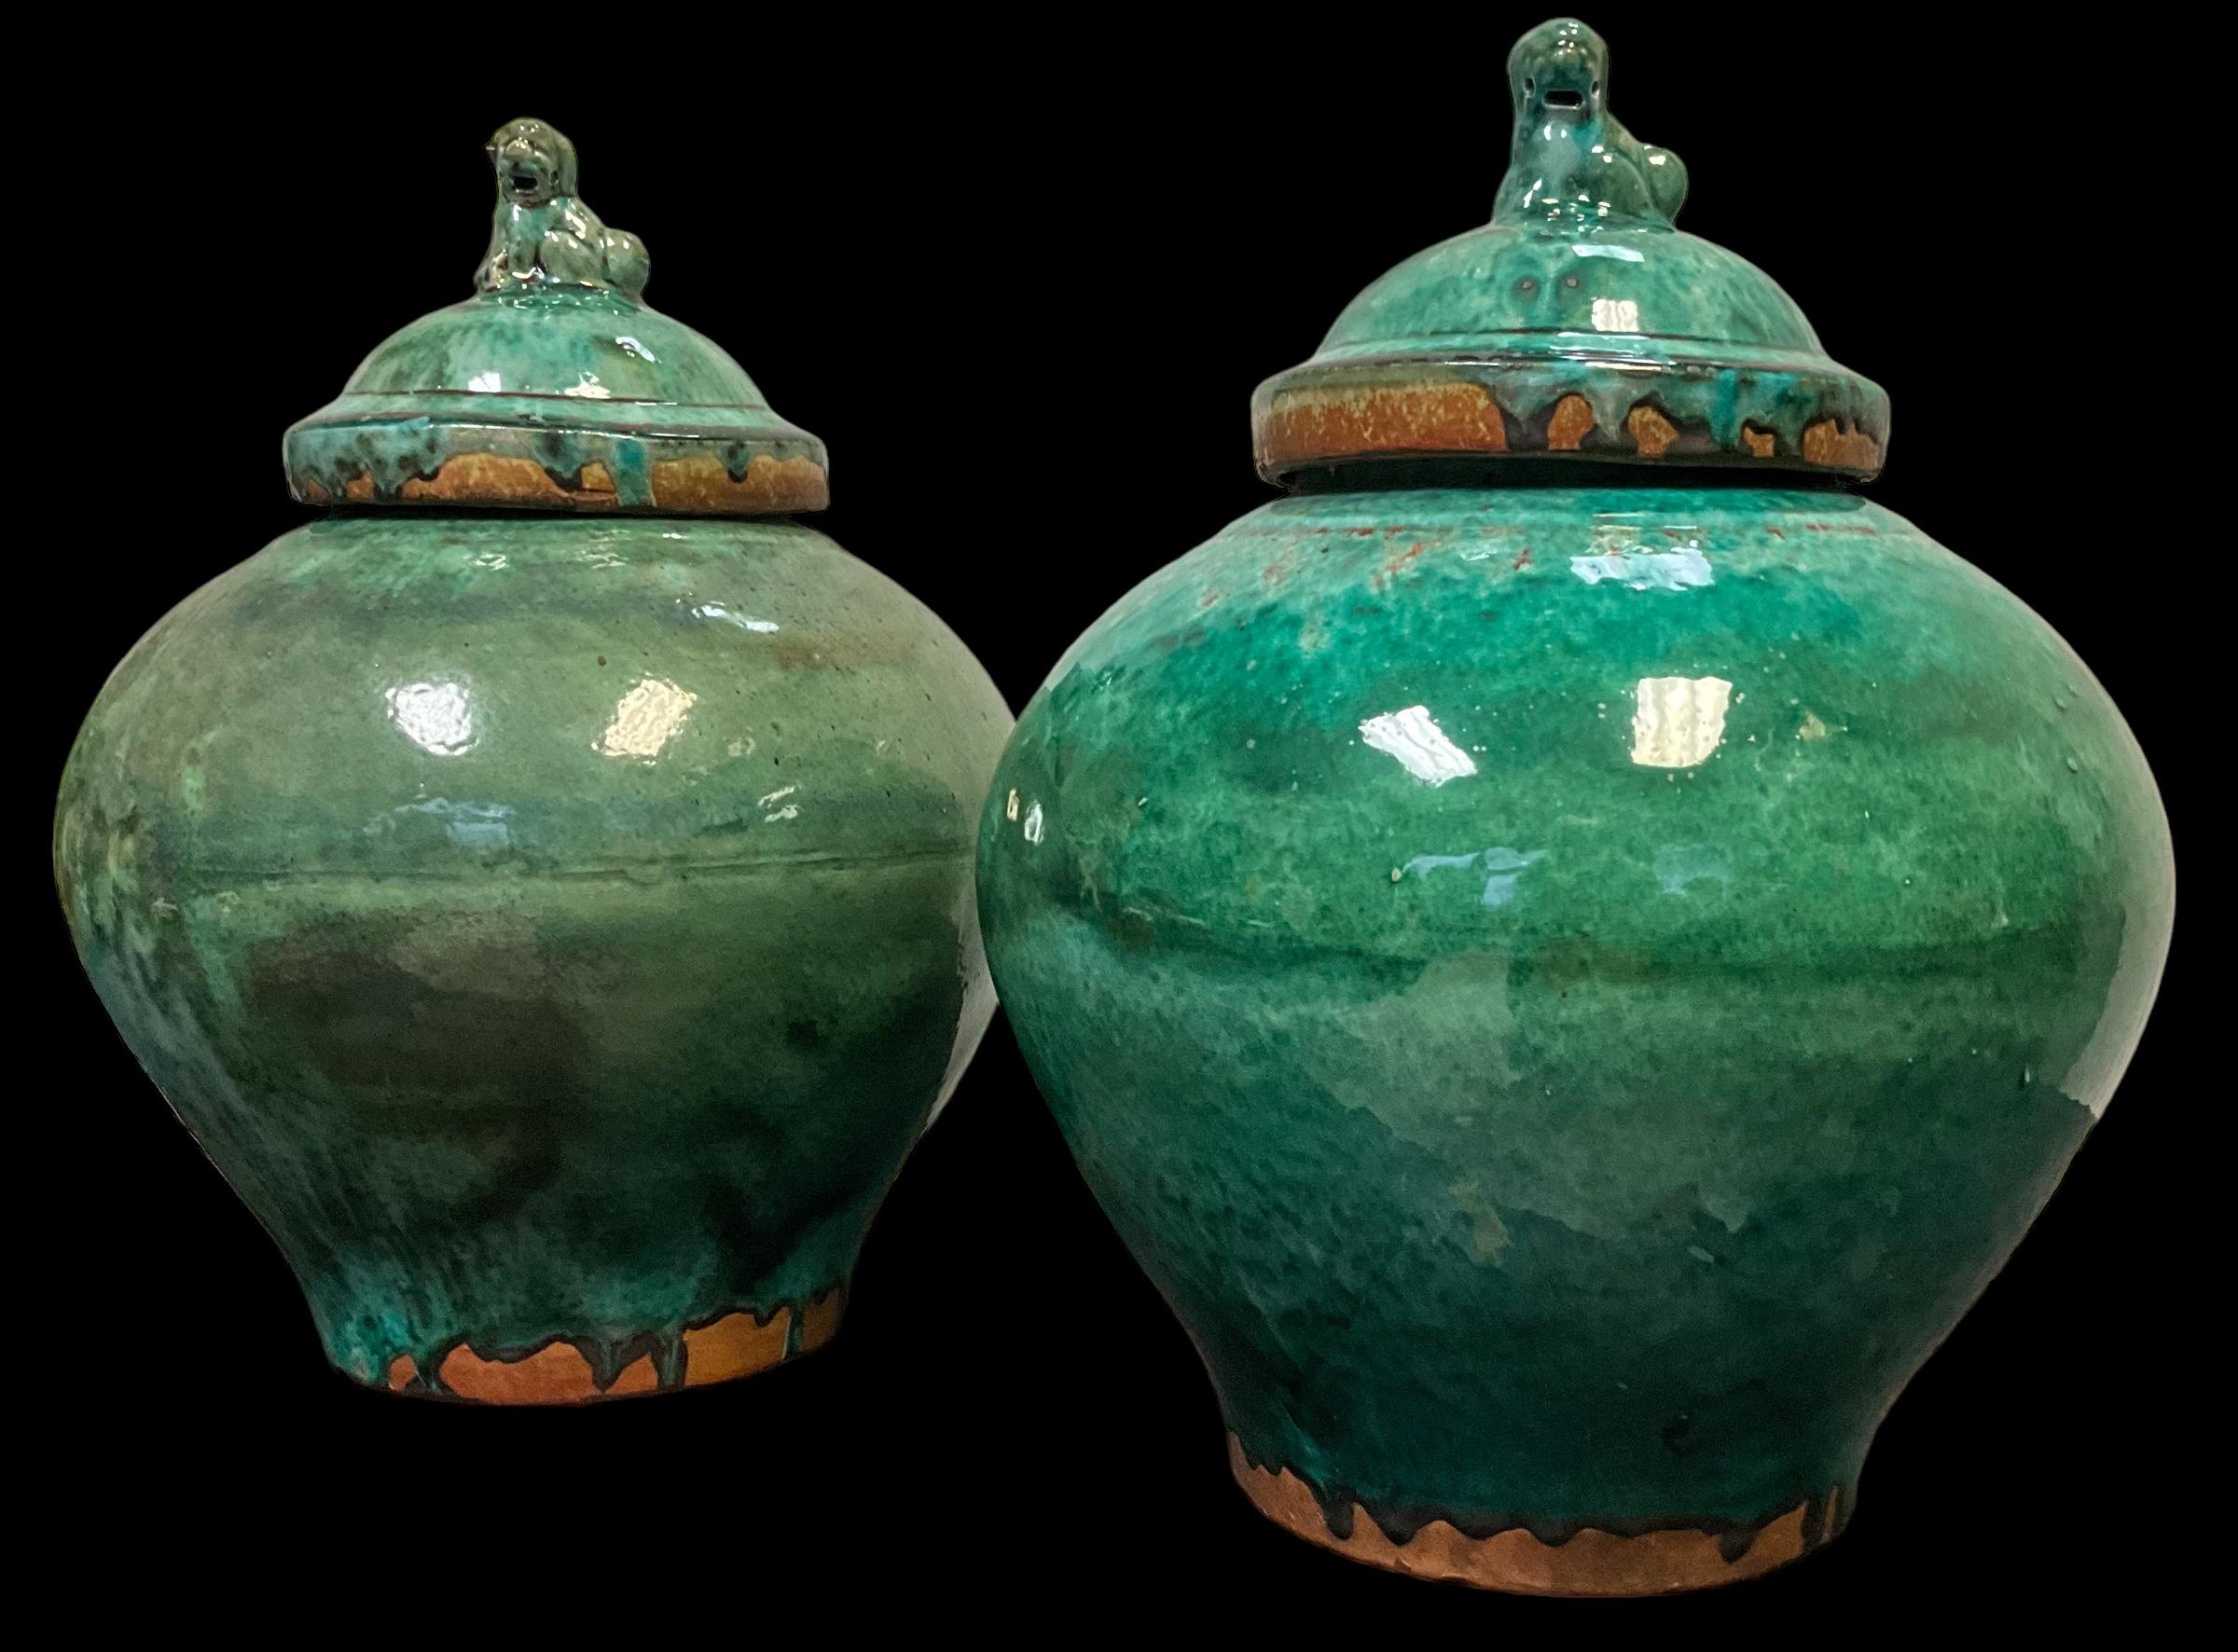 Chinese Export Style Large Scale Green Teracotta Pottery Jars With Foo Dogs - 2 For Sale 3